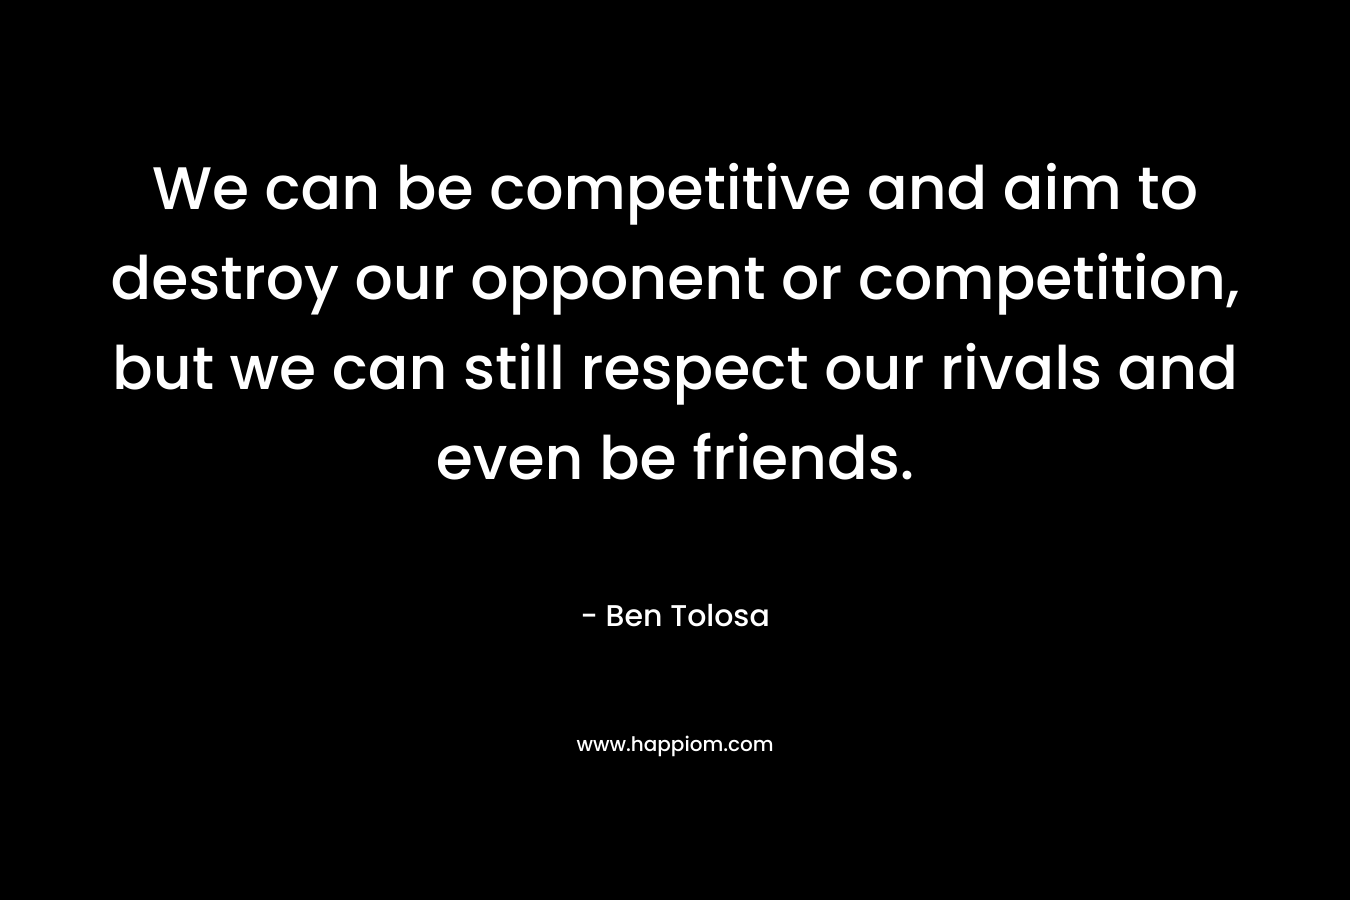 We can be competitive and aim to destroy our opponent or competition, but we can still respect our rivals and even be friends.